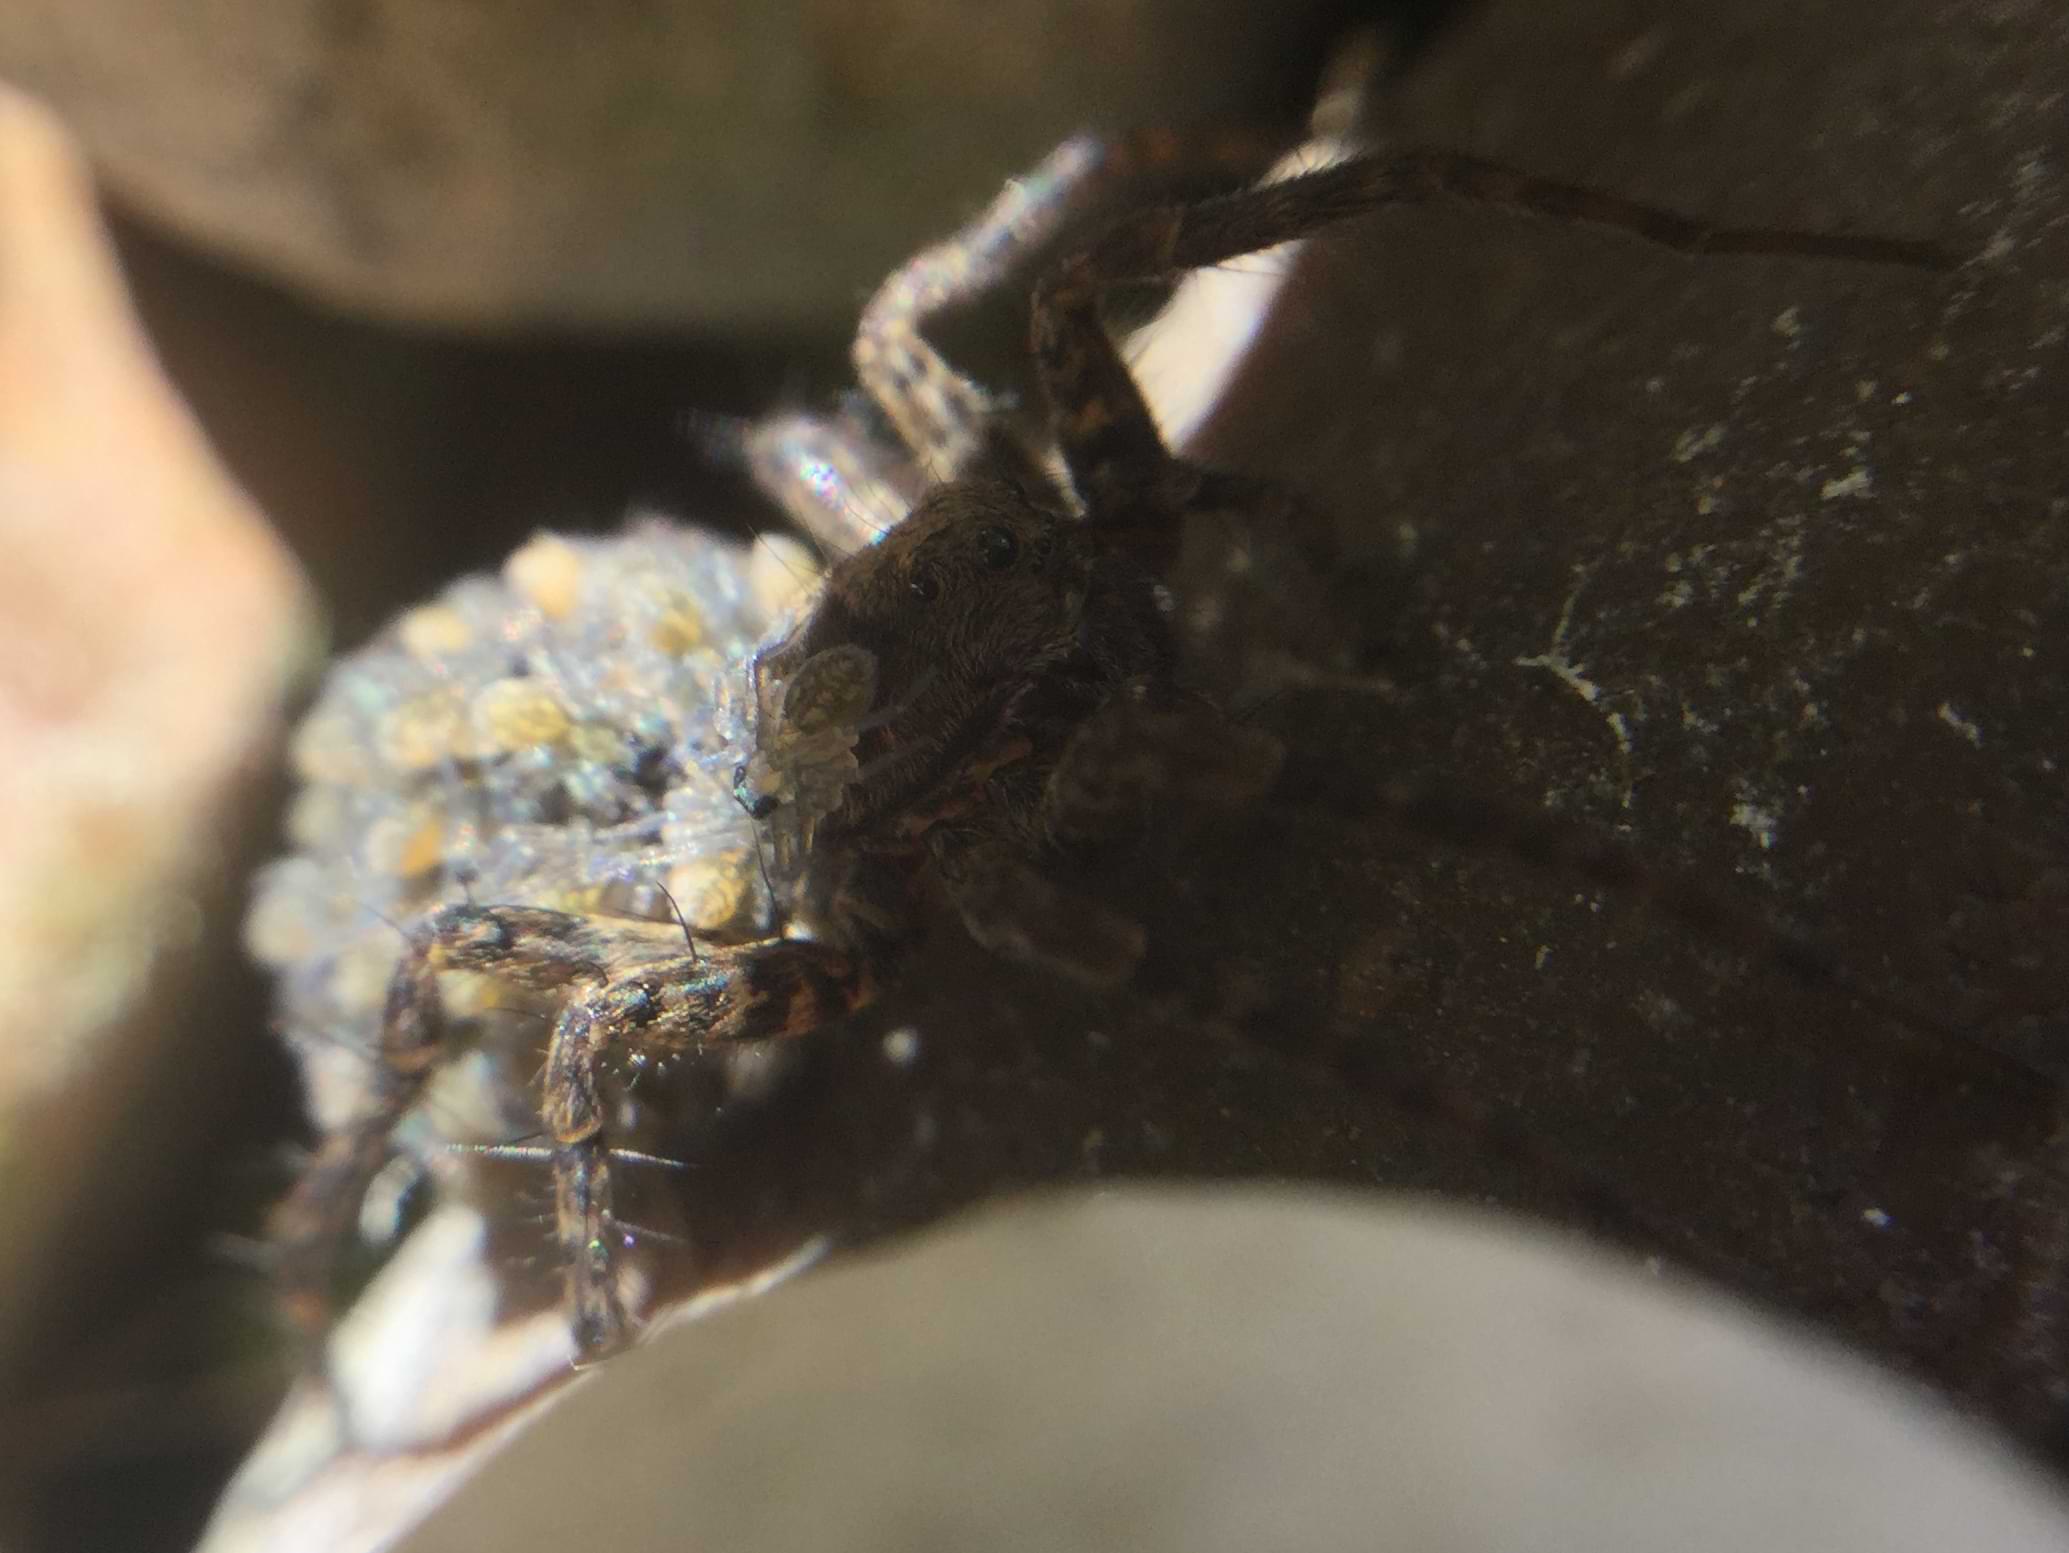 Close up photo of the wolf spider's head. Of note here is the single spiderling clinging to the side of her body. It has two large visible eyes and a light brown abdomen with a symmetrical pattern of white markings on it.